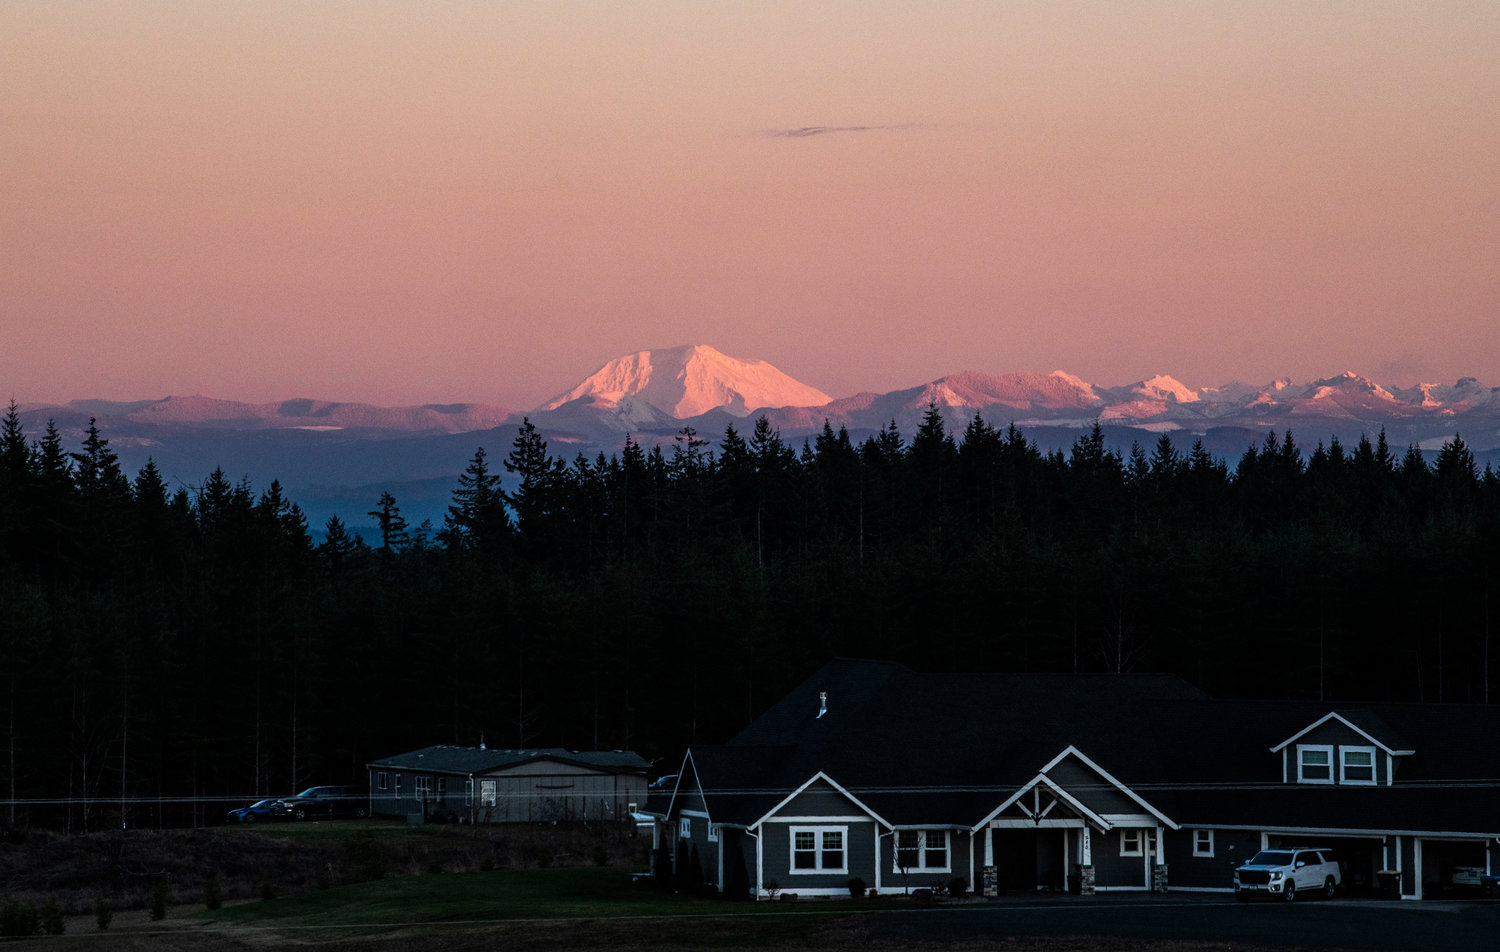 Mount Adams rises over the horizon as seen from Brown Road in Adna on Sunday night.